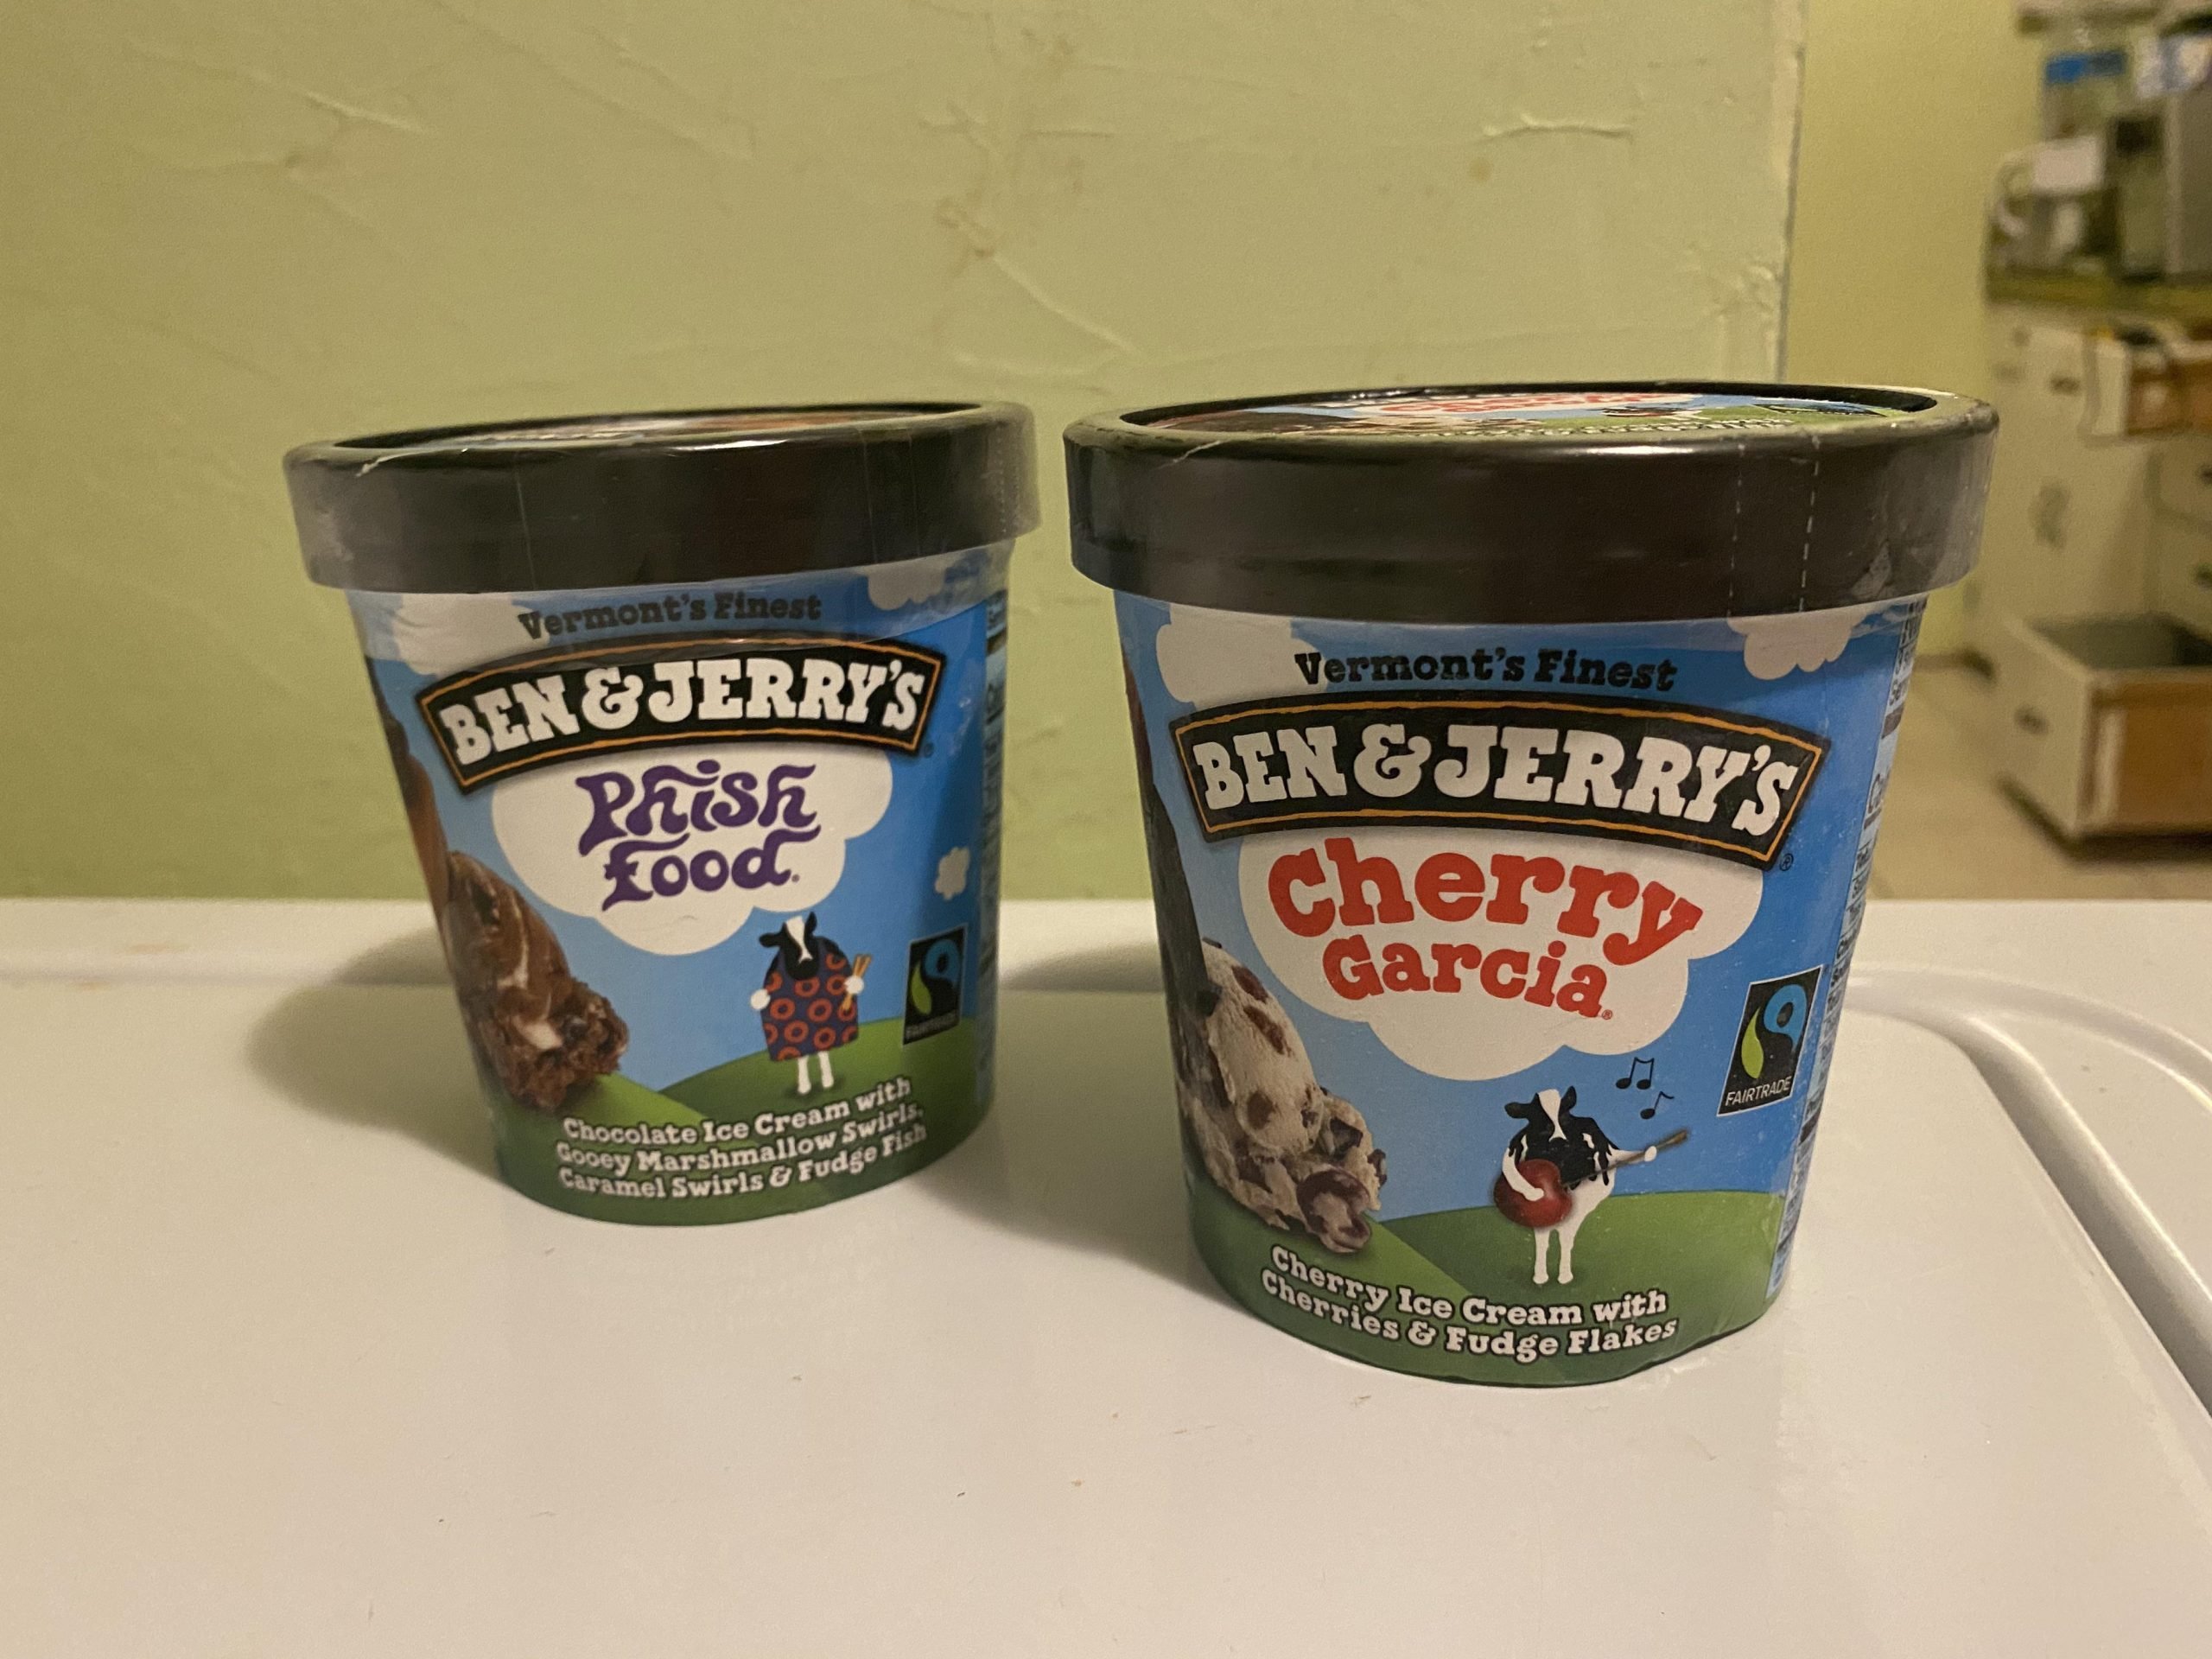 My two favorite Ben and Jerrys flavors are now officially ...